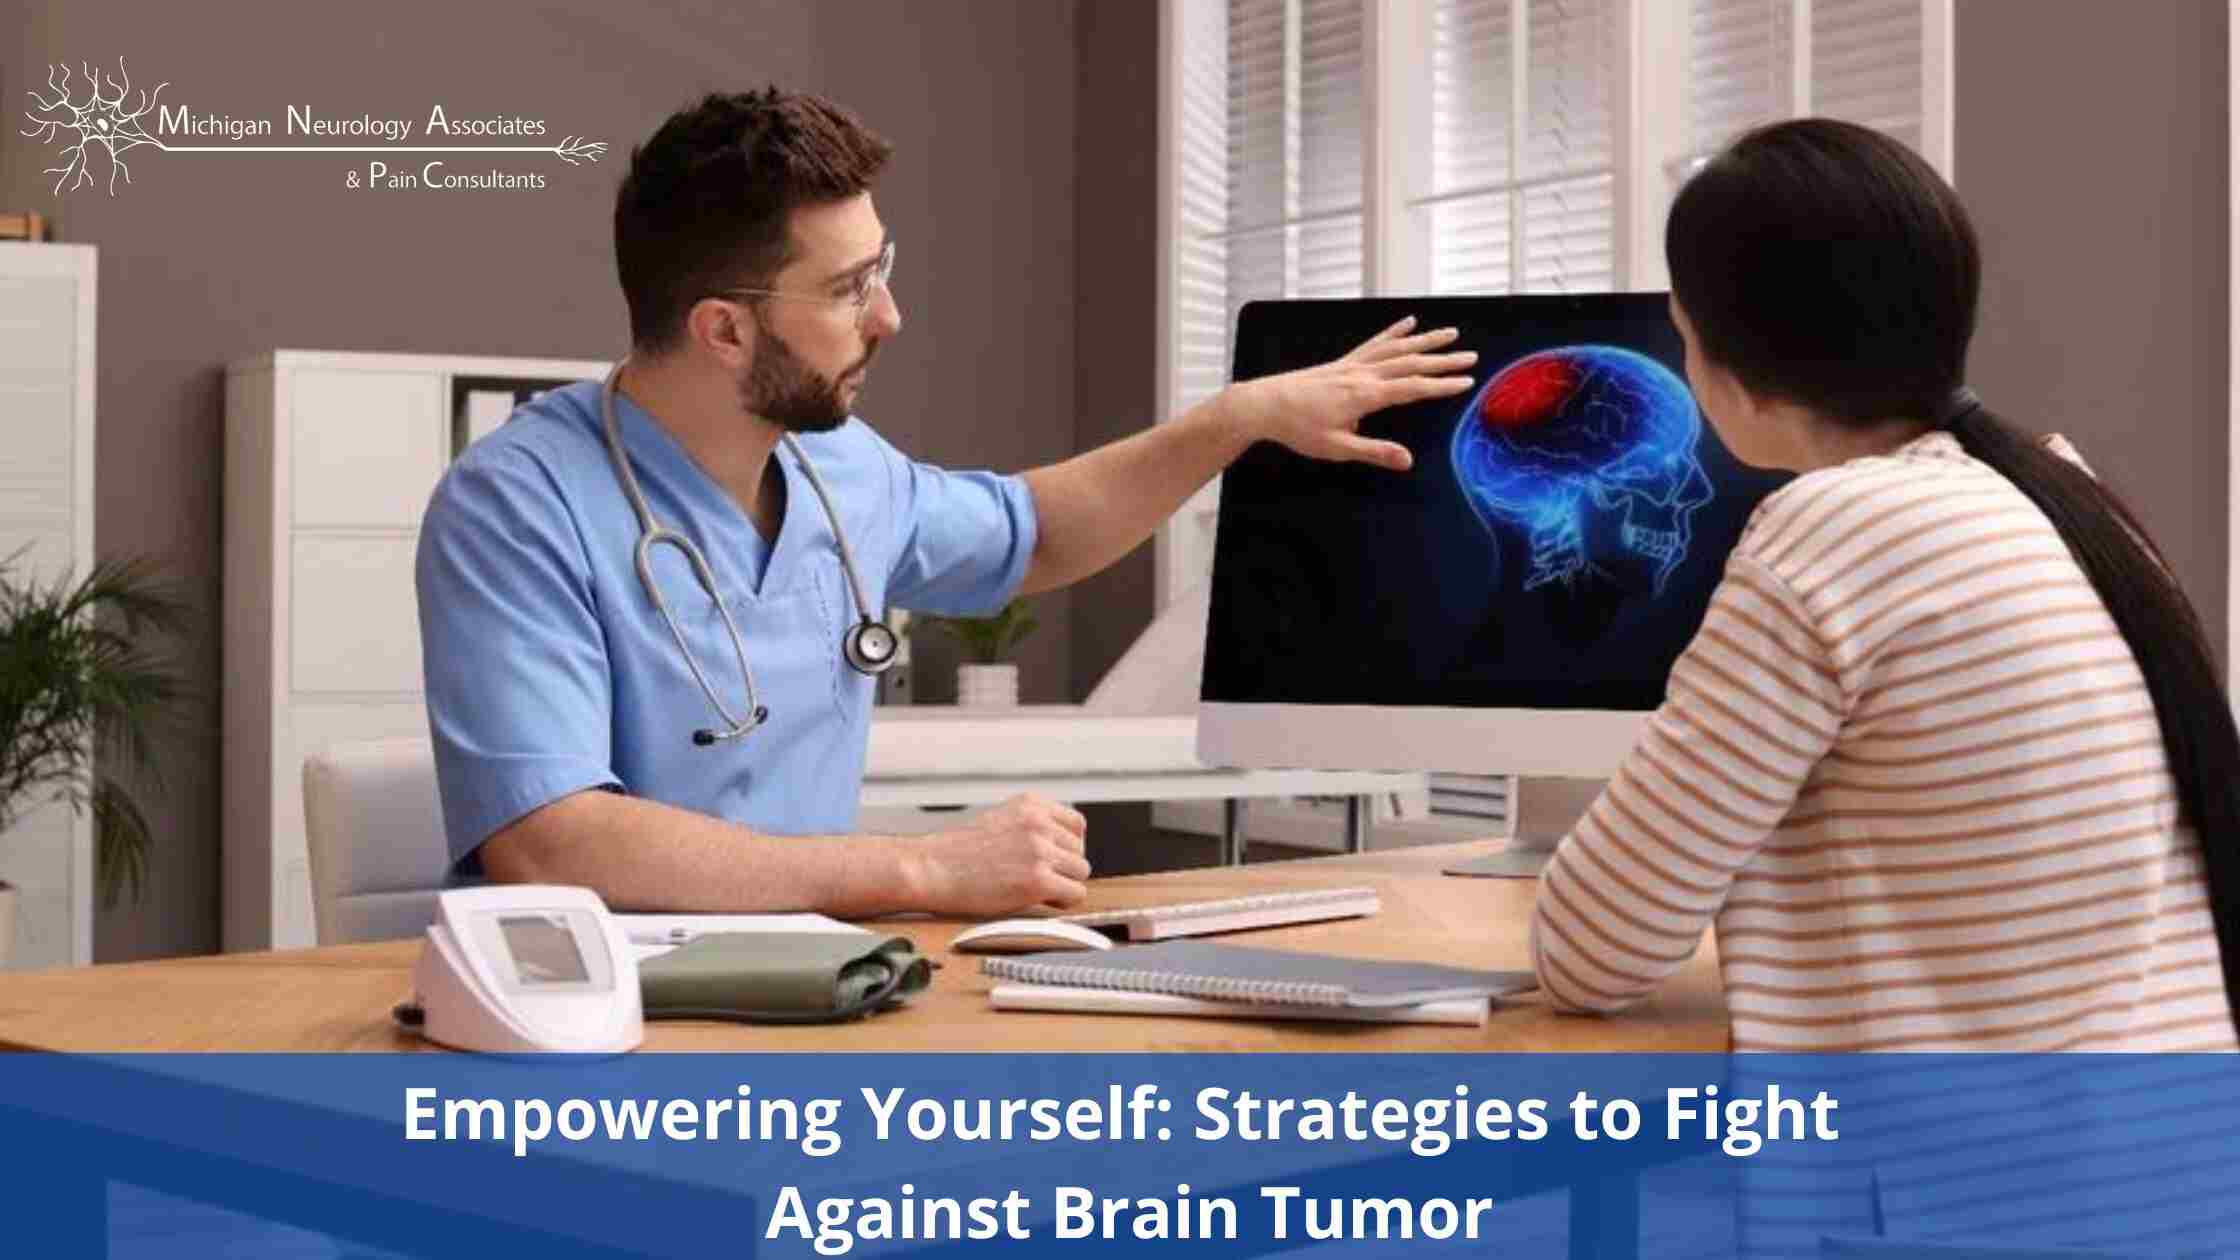 Empowering Yourself: Strategies to Fight Against Brain Tumor